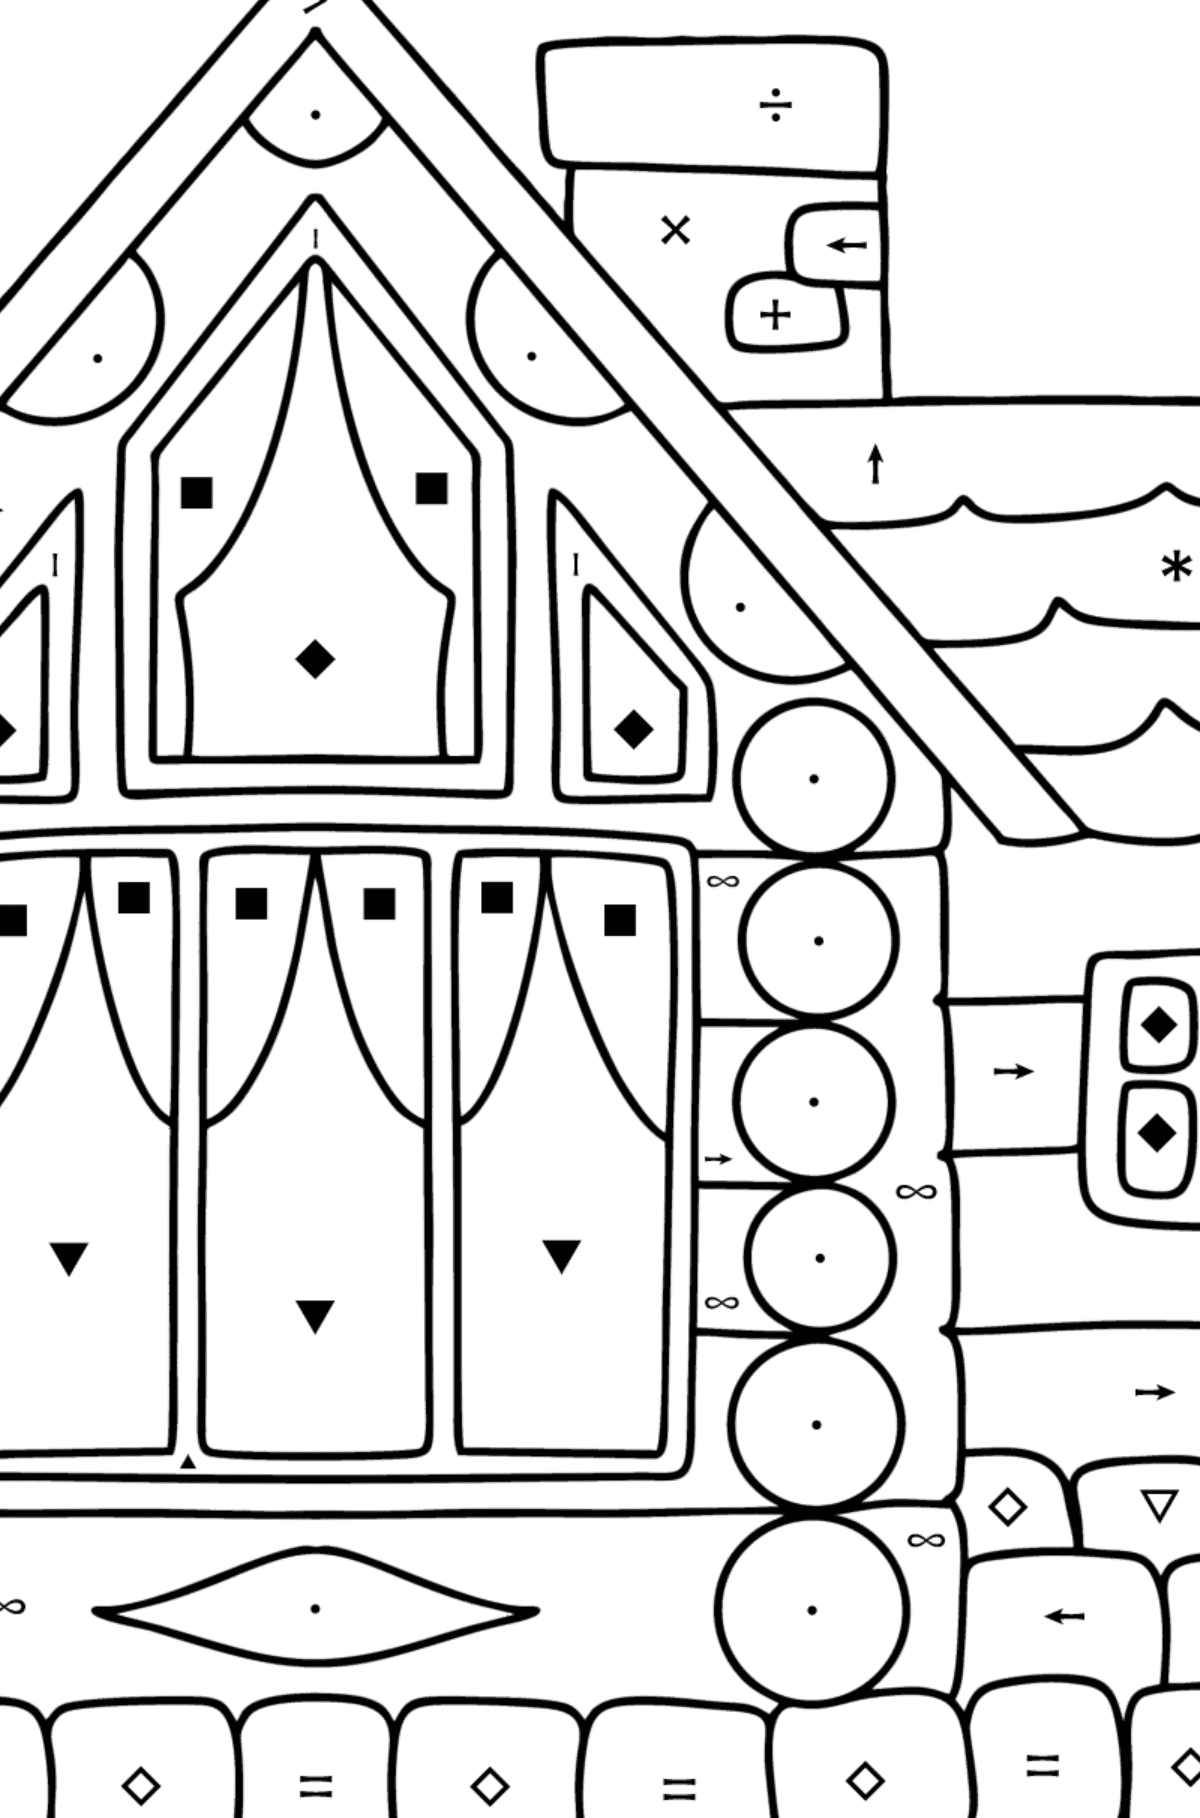 Log Cabin in Wood coloring page - Coloring by Symbols for Kids